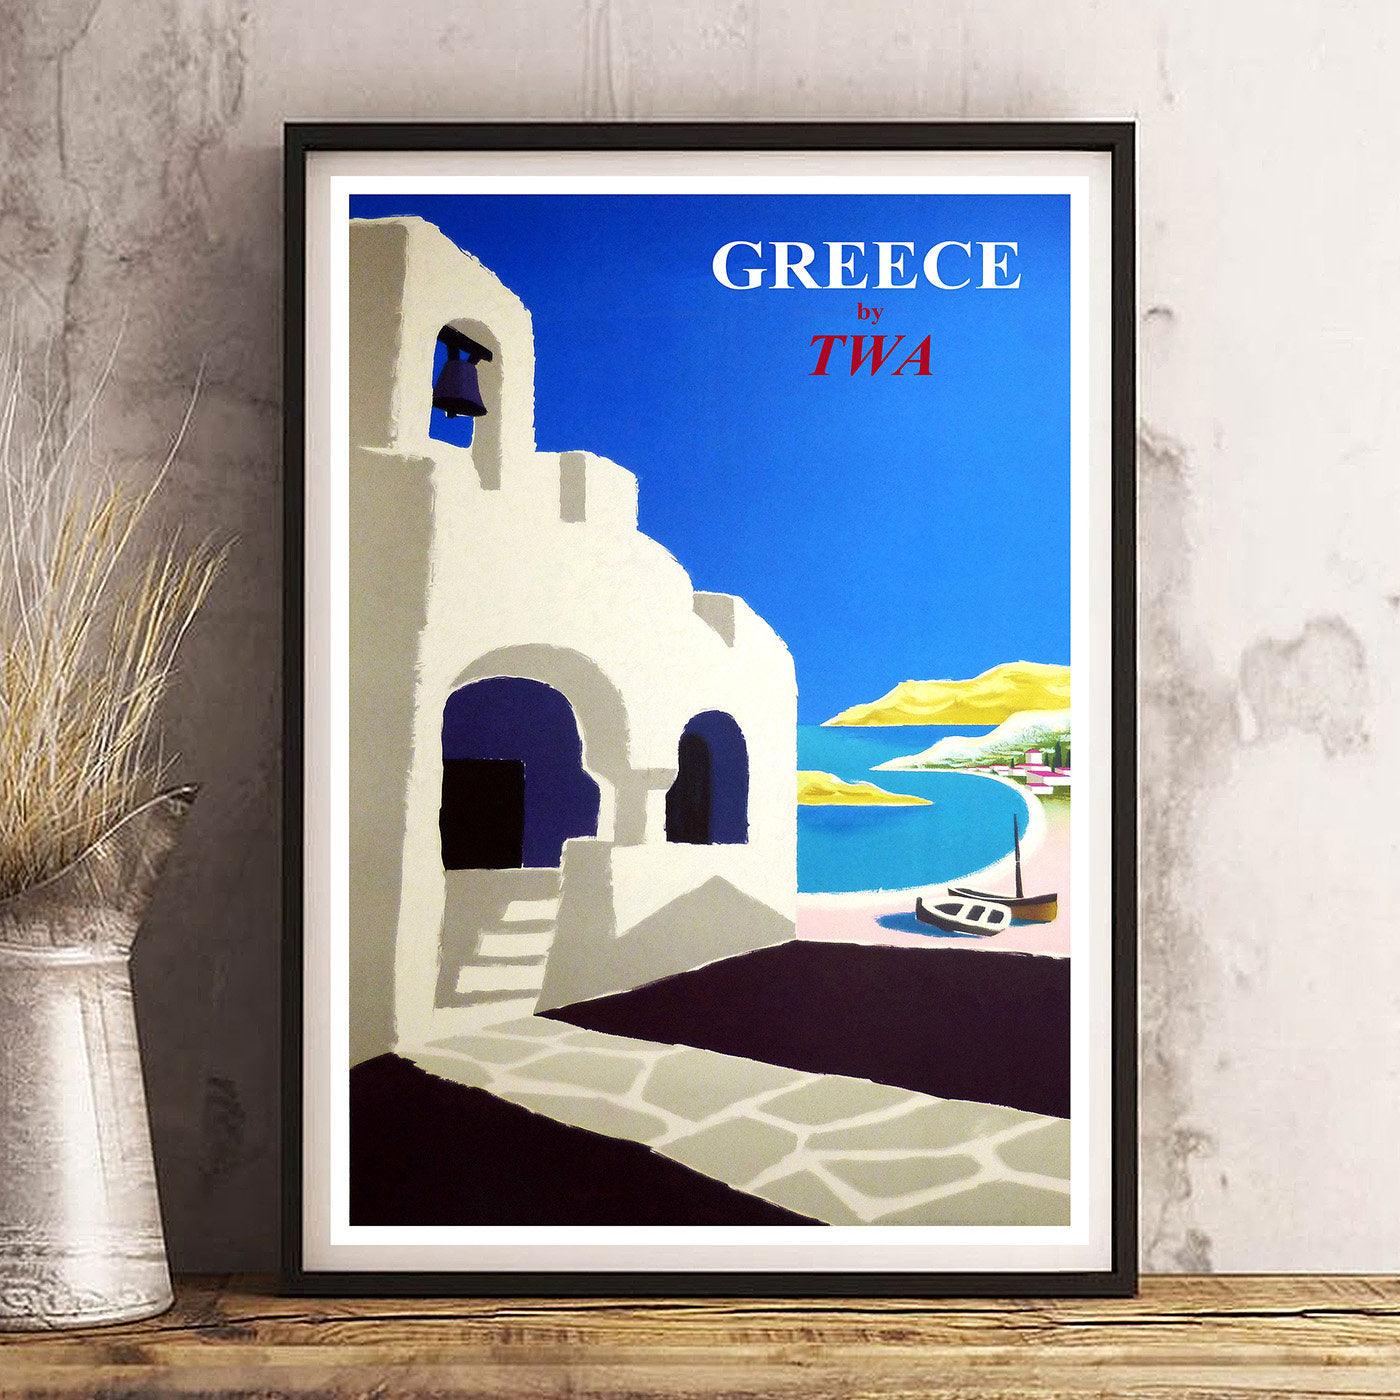 GREECE TWA - Vintage Travel Poster - Classic Posters